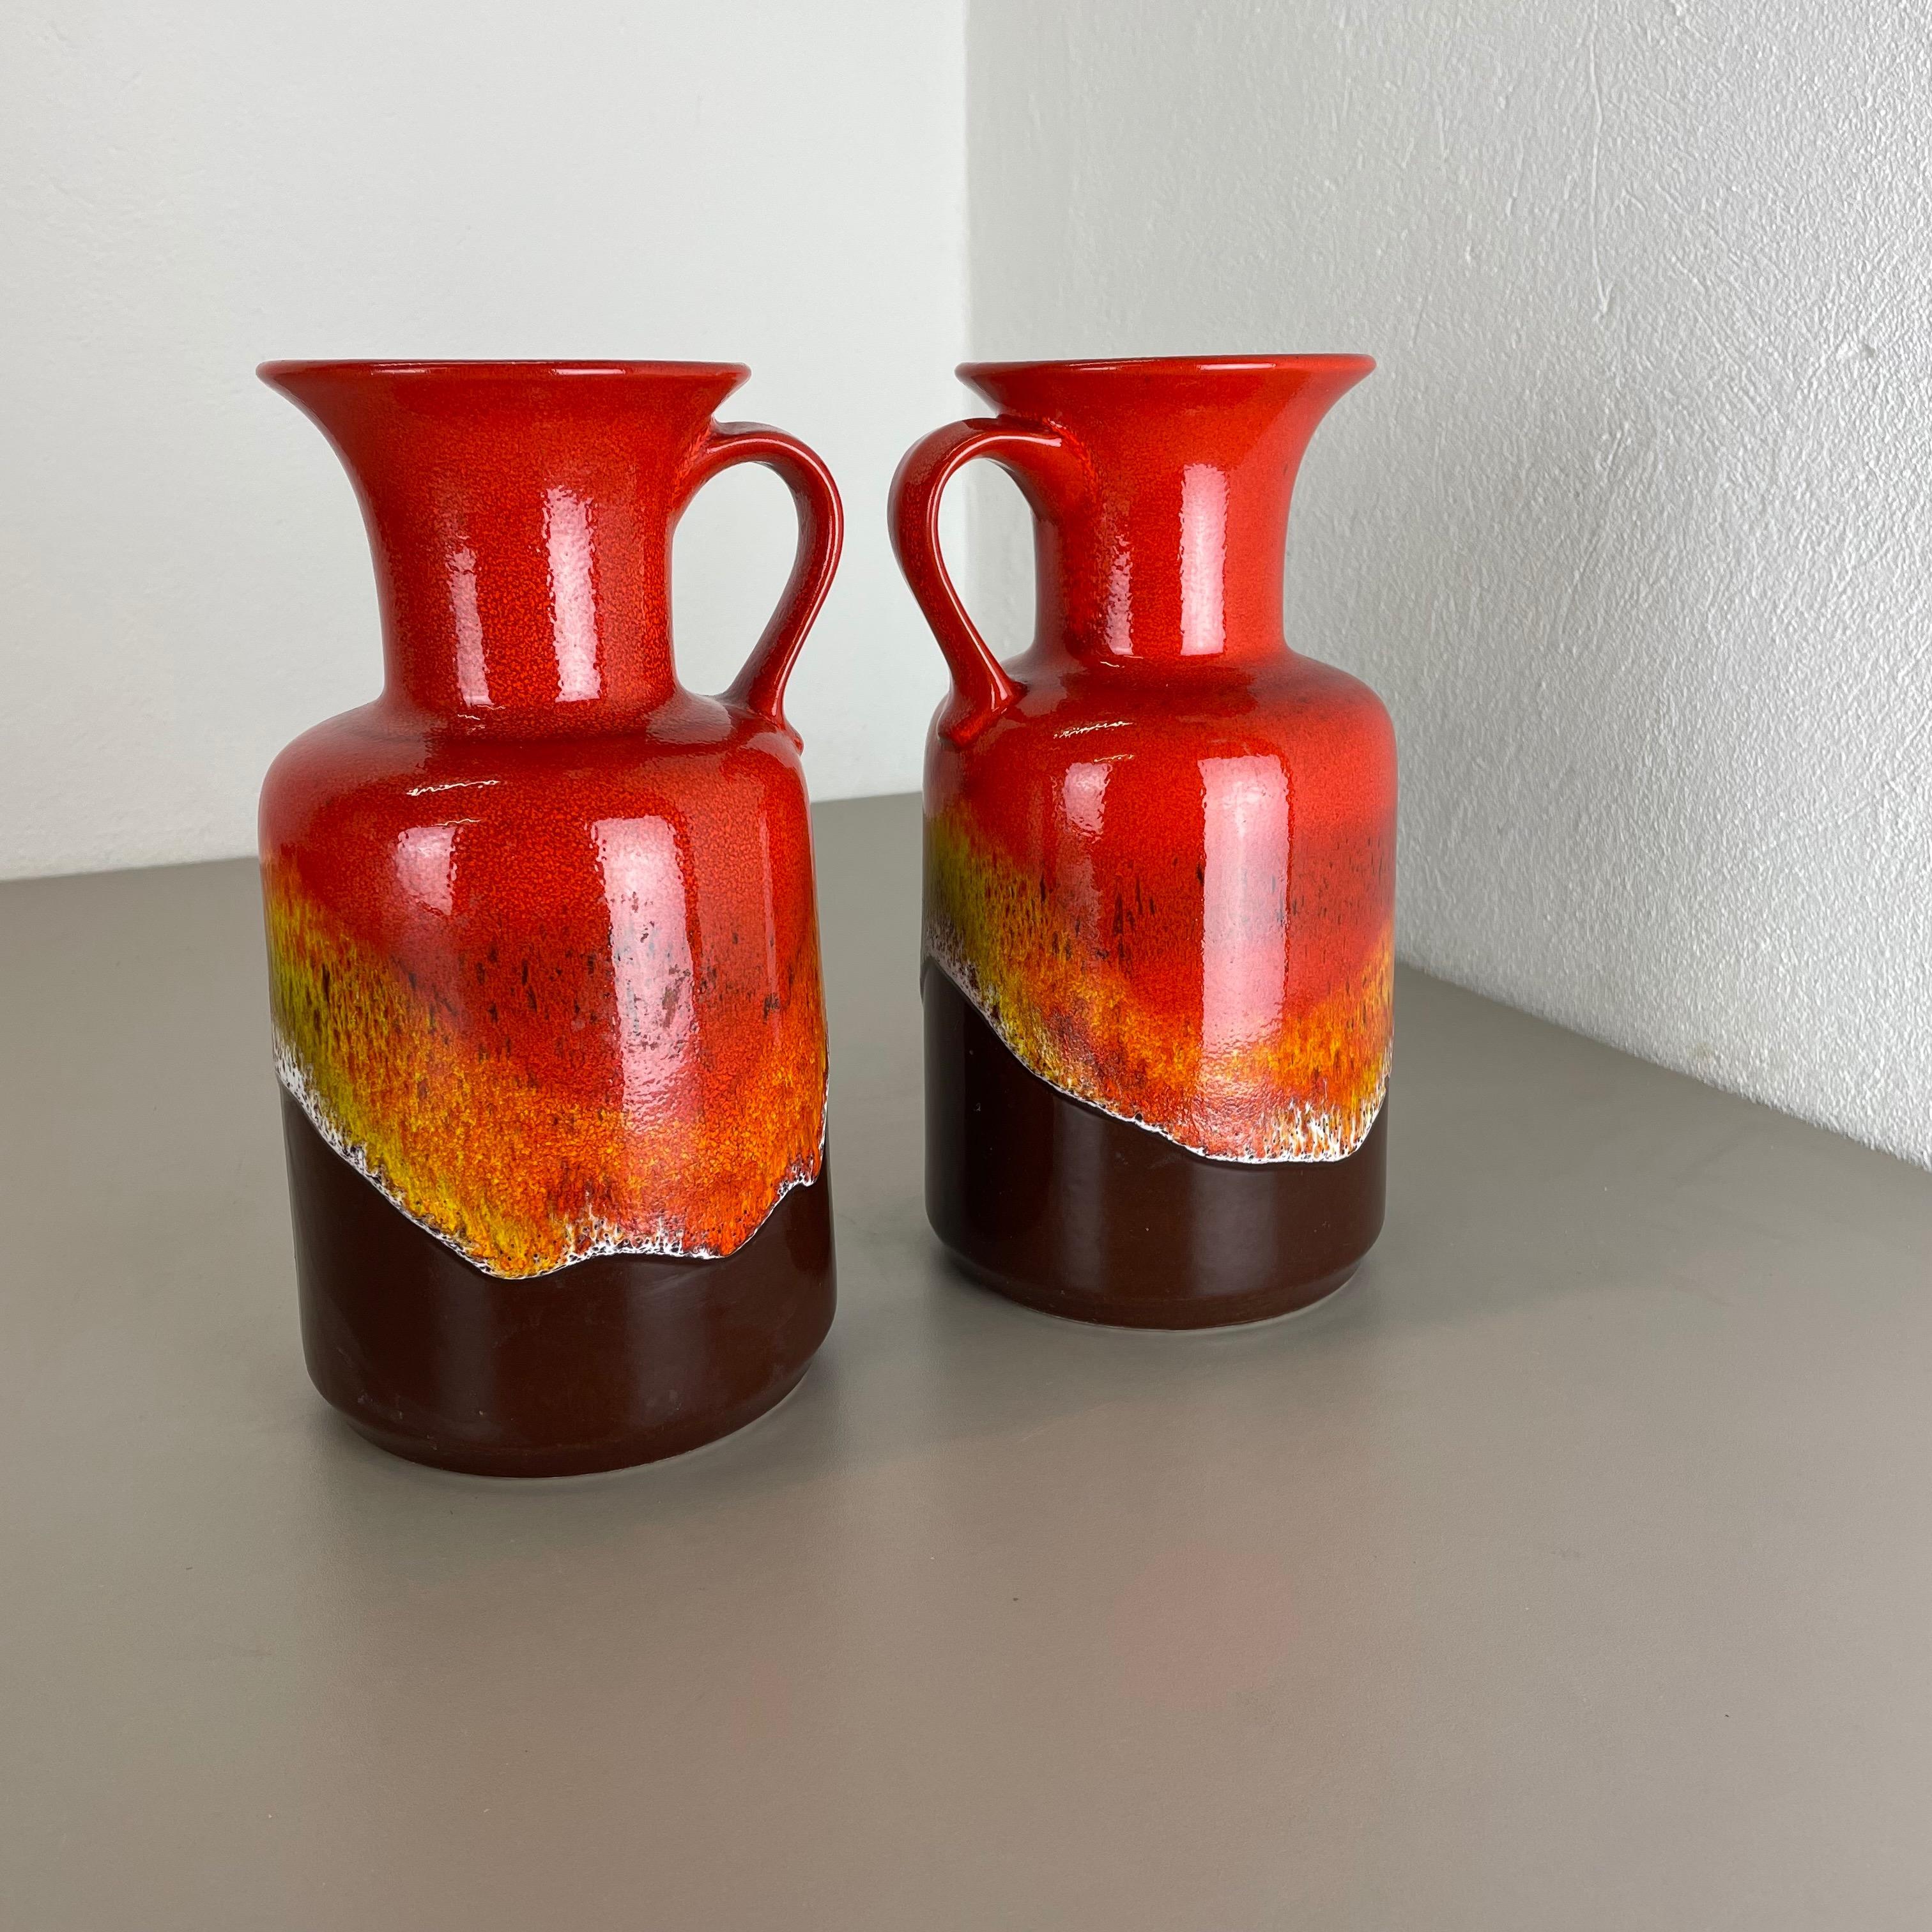 Article:

Pottery ceramic vase set of 2.


Producer:

JASBA Ceramic, Germany.


Decade:

1970s.



Description:

Set of 2 original vintage 1970s pottery ceramic vase made in Germany. High quality German production with a nice